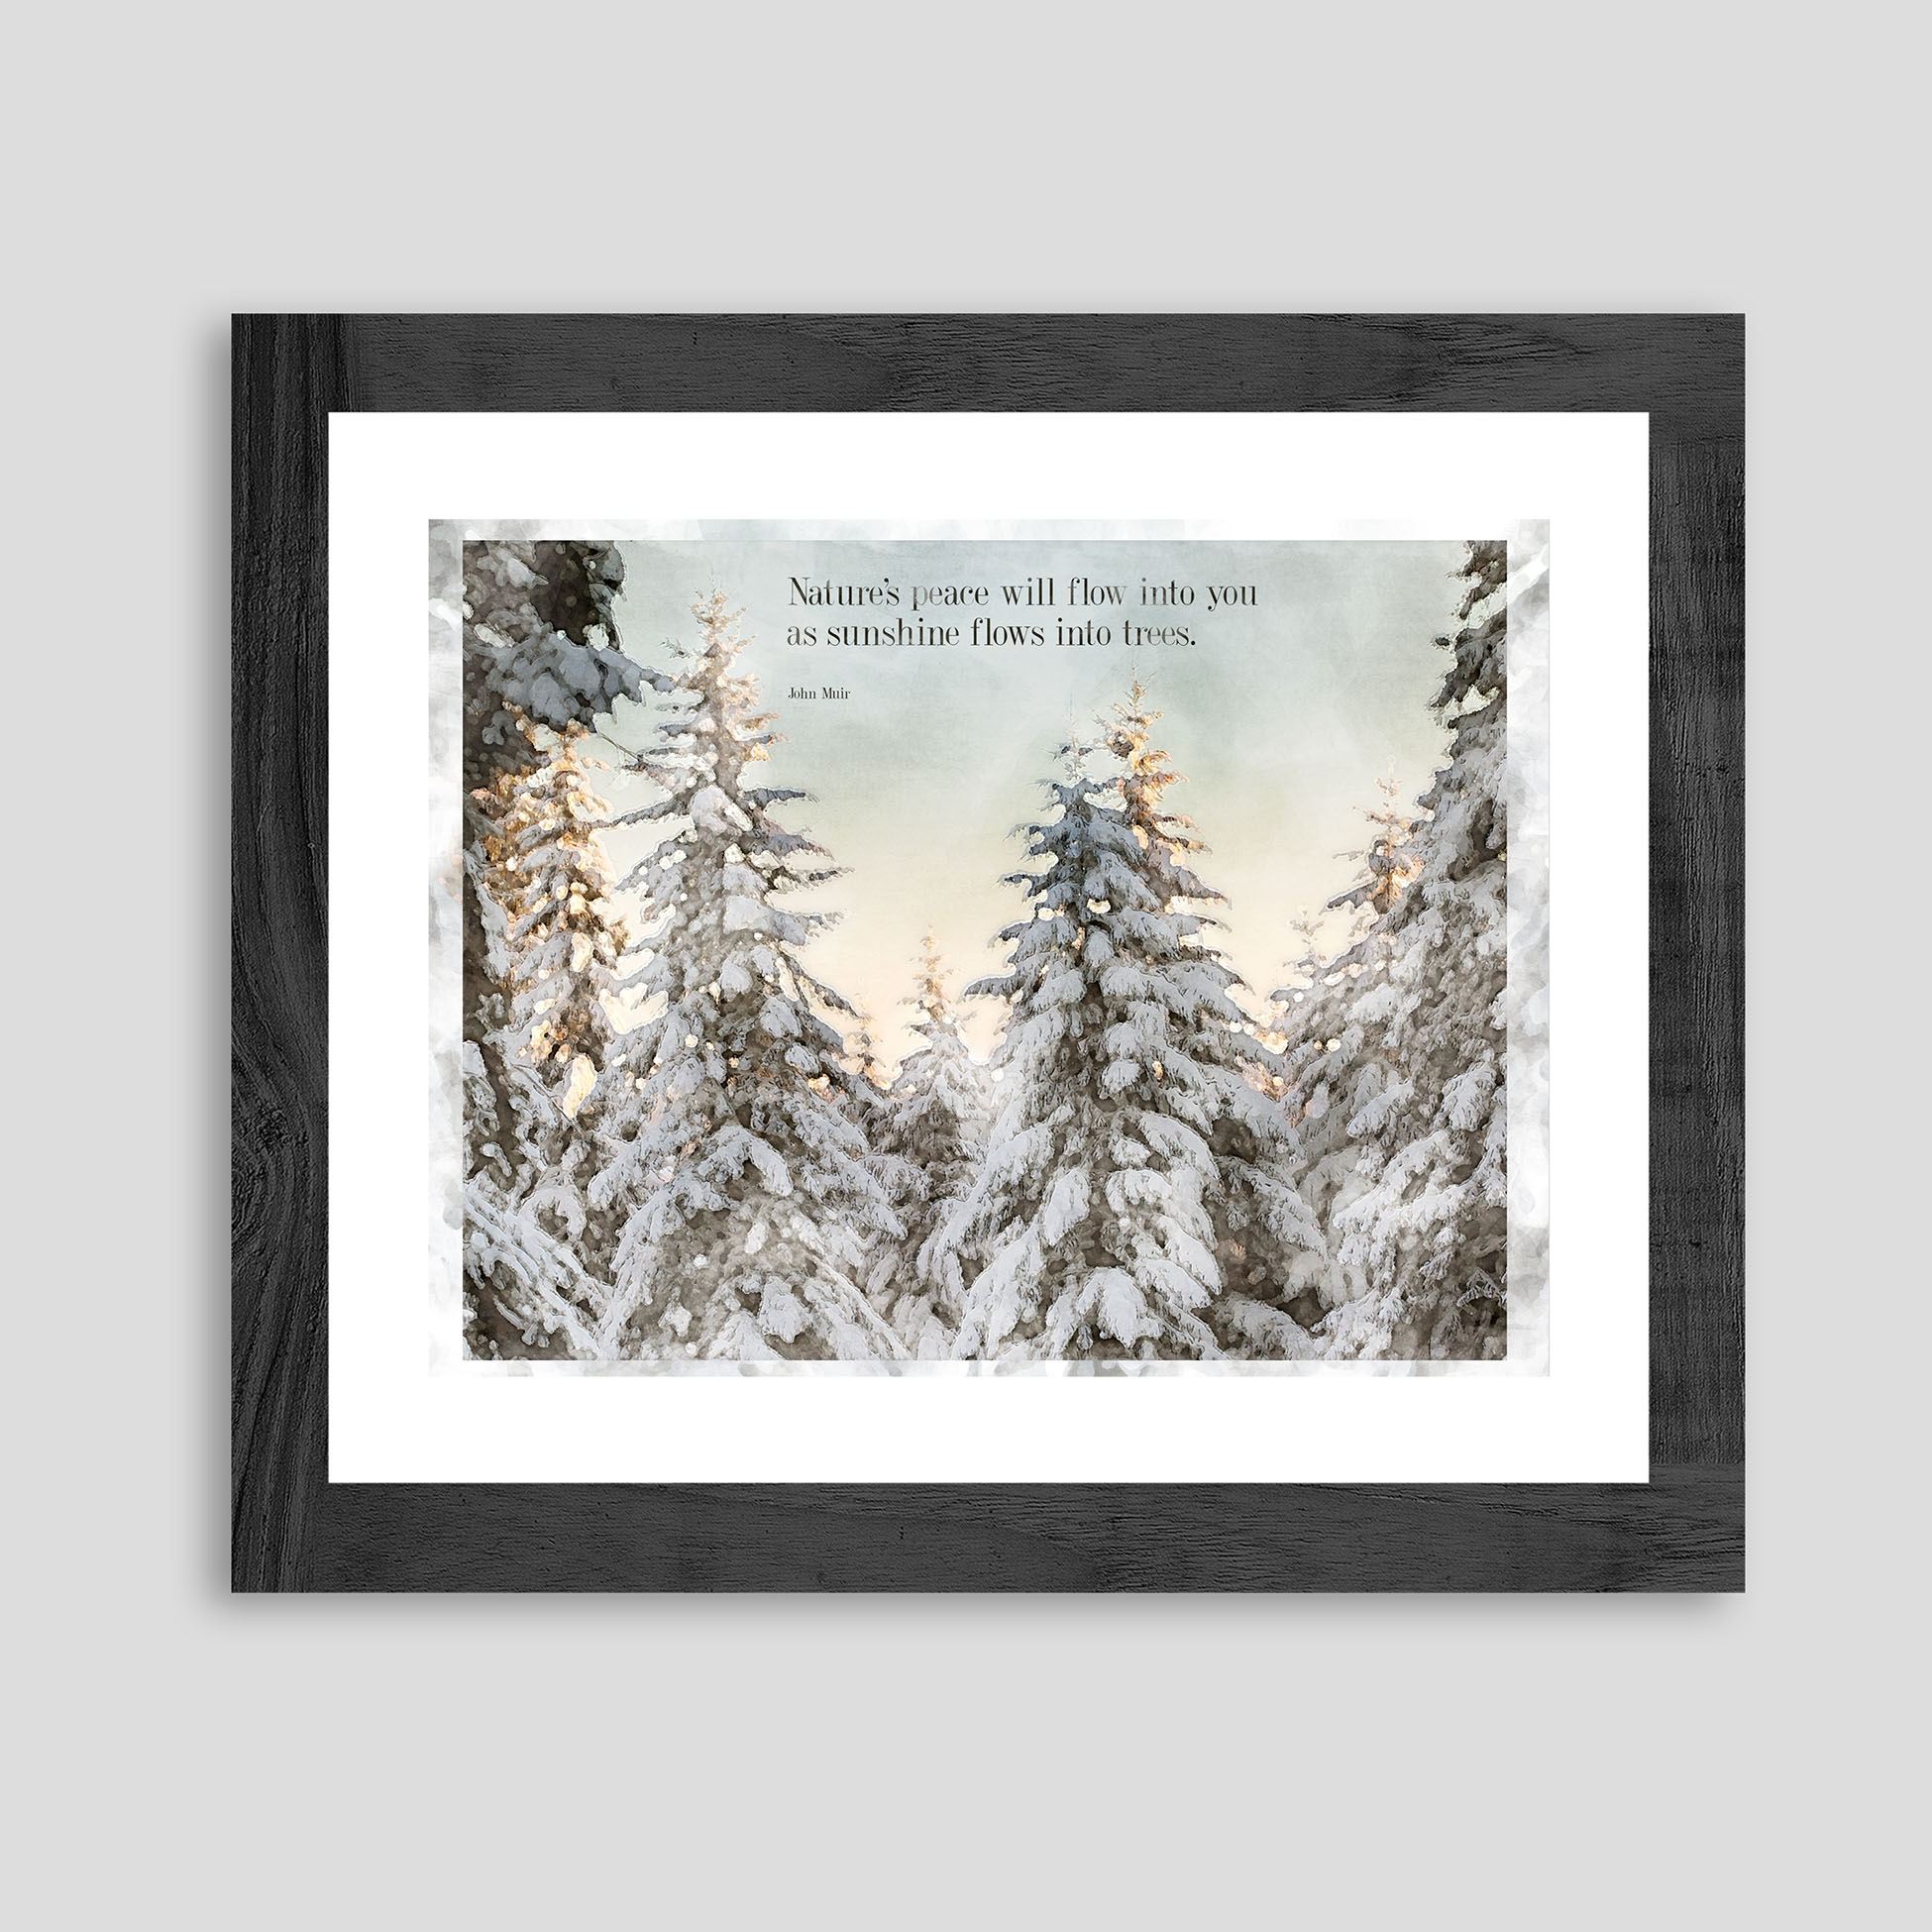 Snow covered firs in watercolor print with John Muir quote.